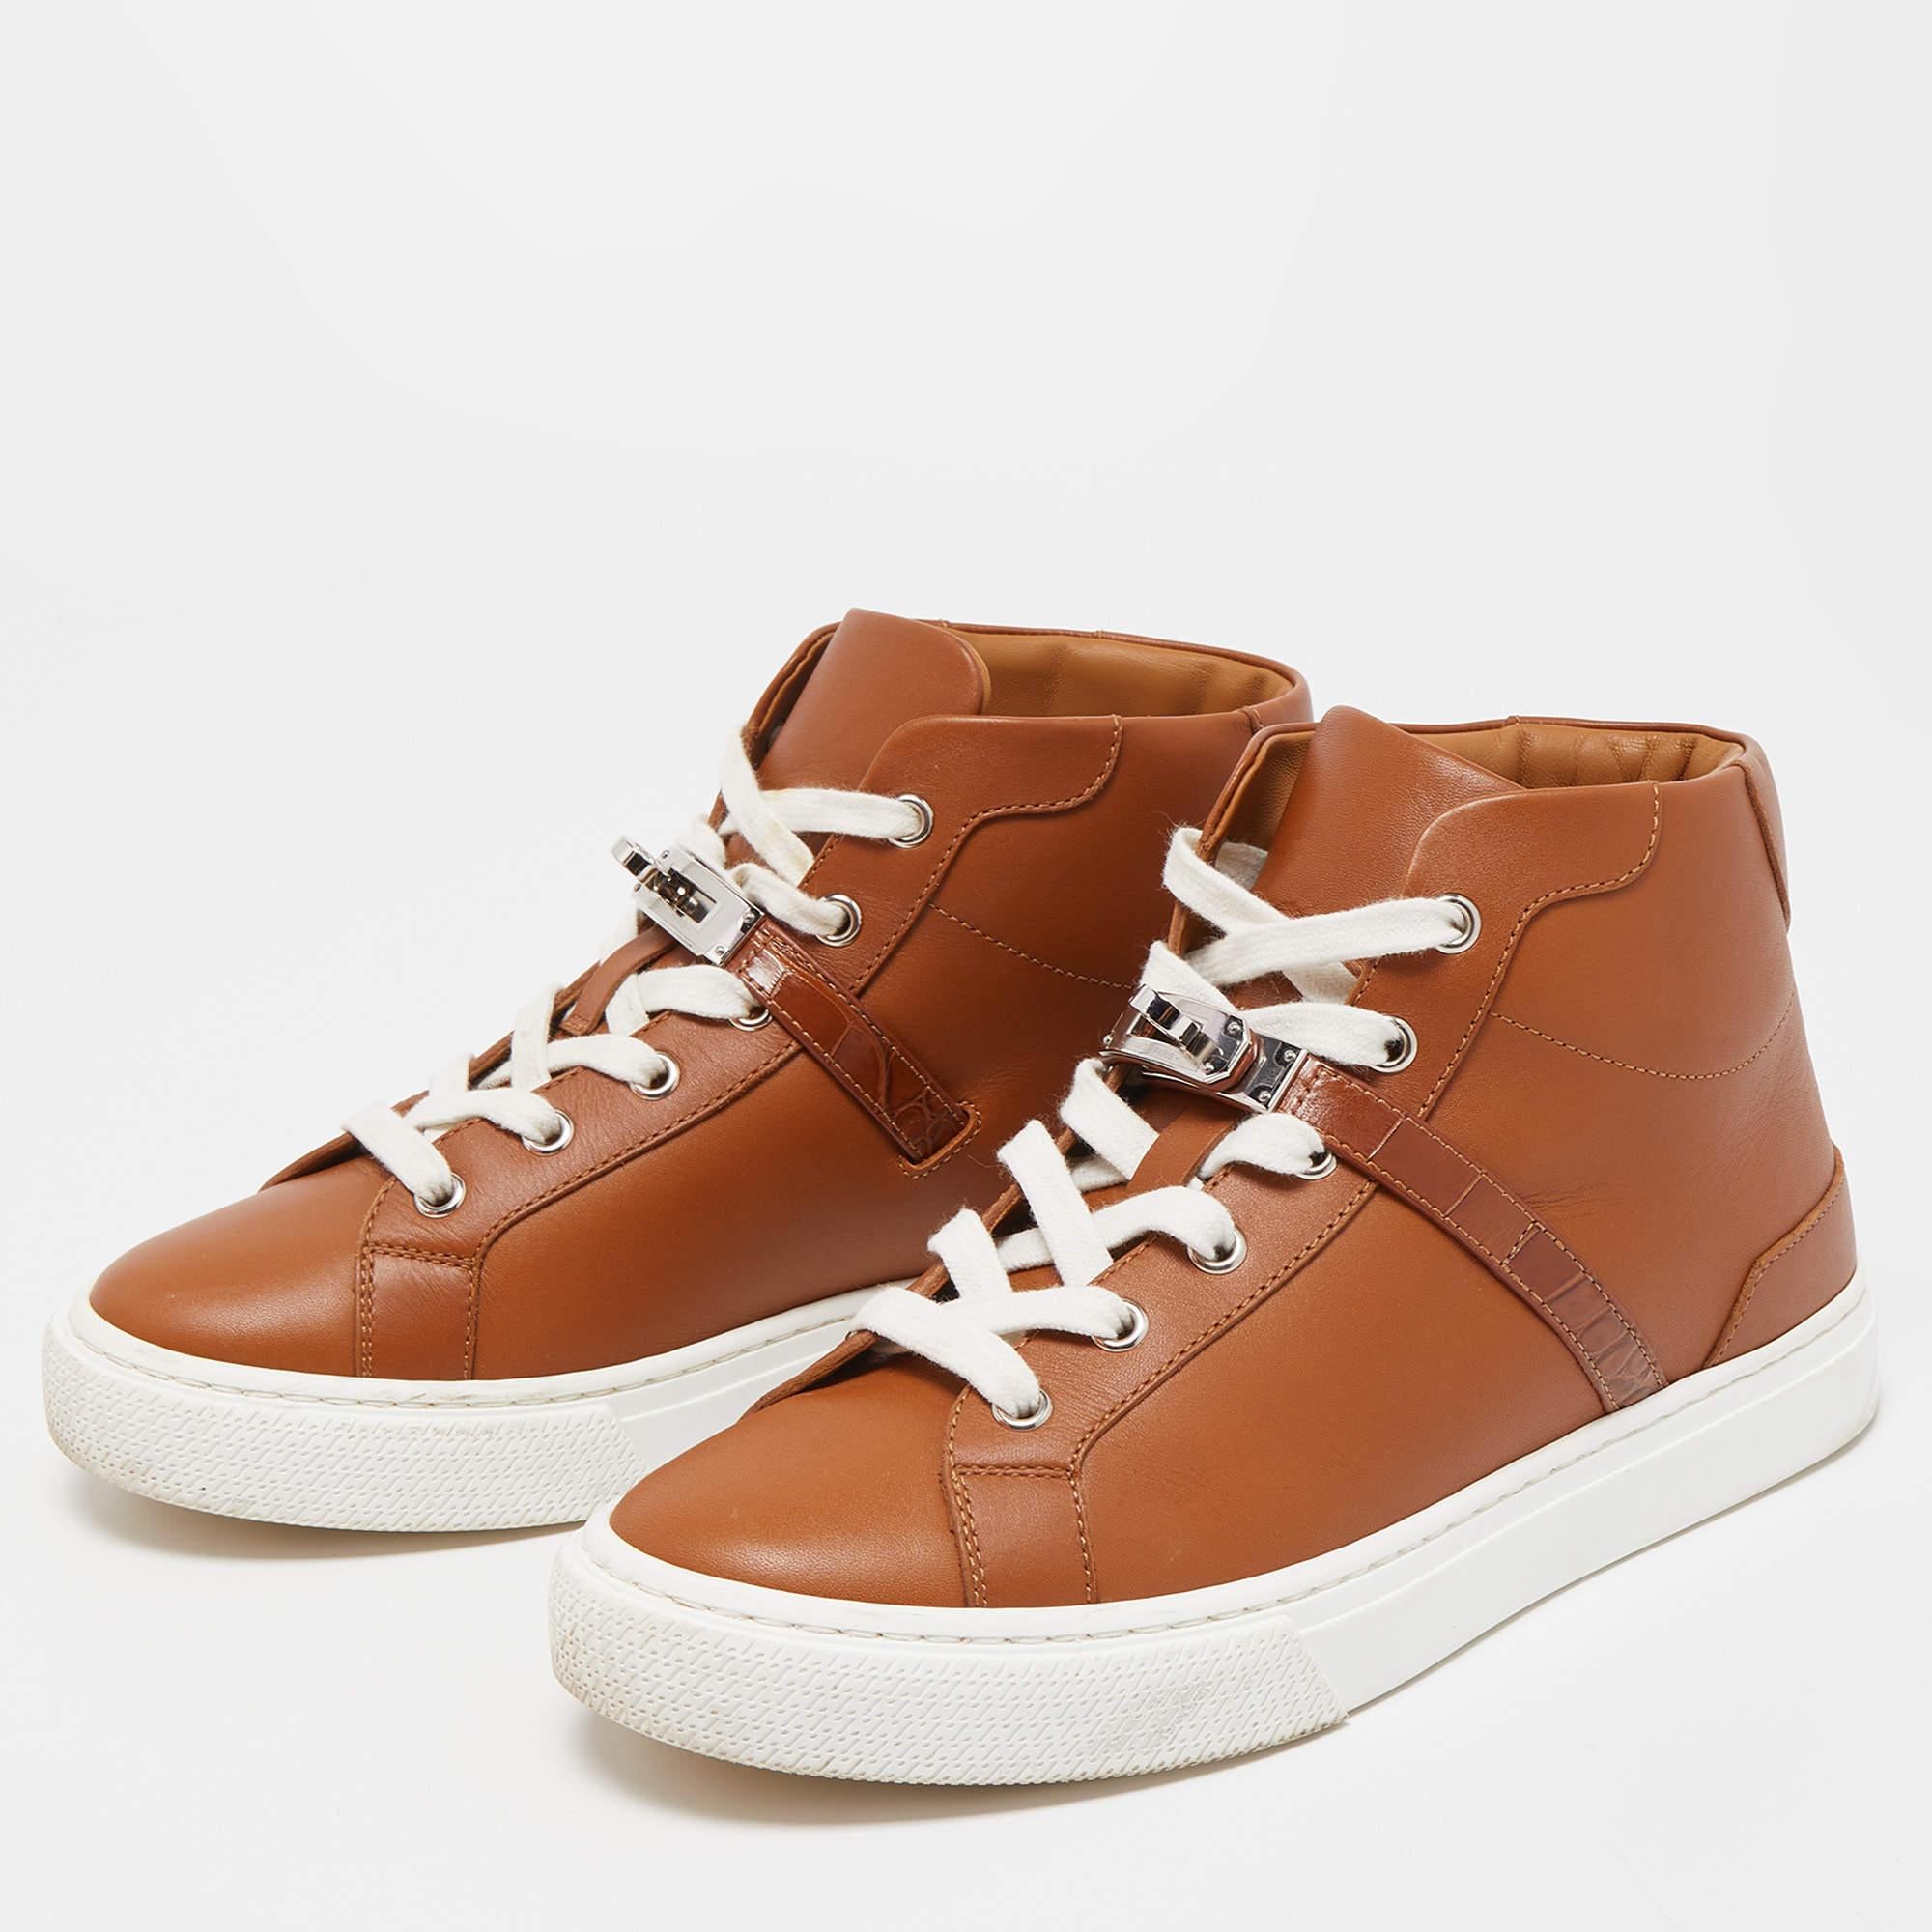 Women's Hermes Brown Leather Daydream High Top Sneakers Size 37.5